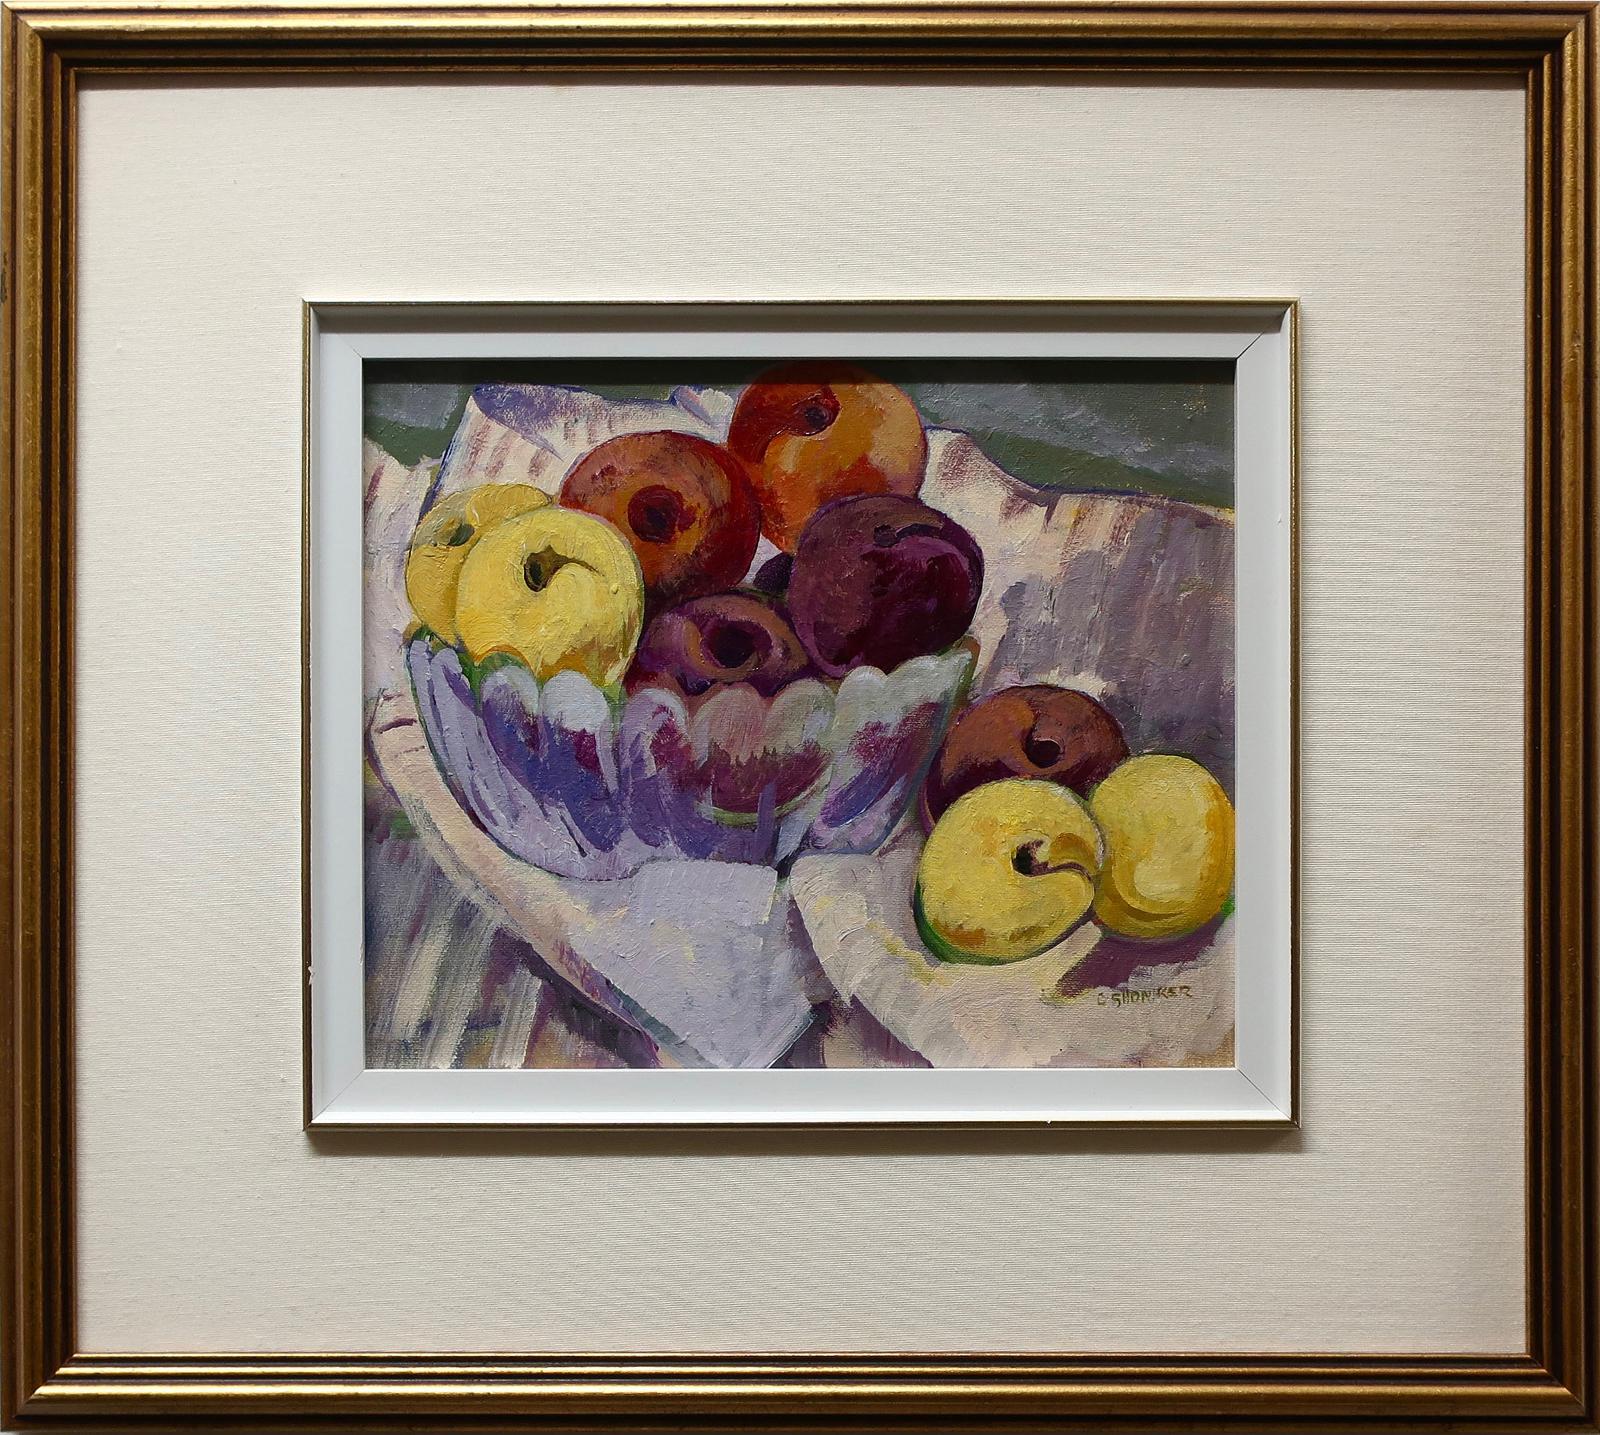 Claire Marie Shoniker (1932) - Red And Yellow Plums